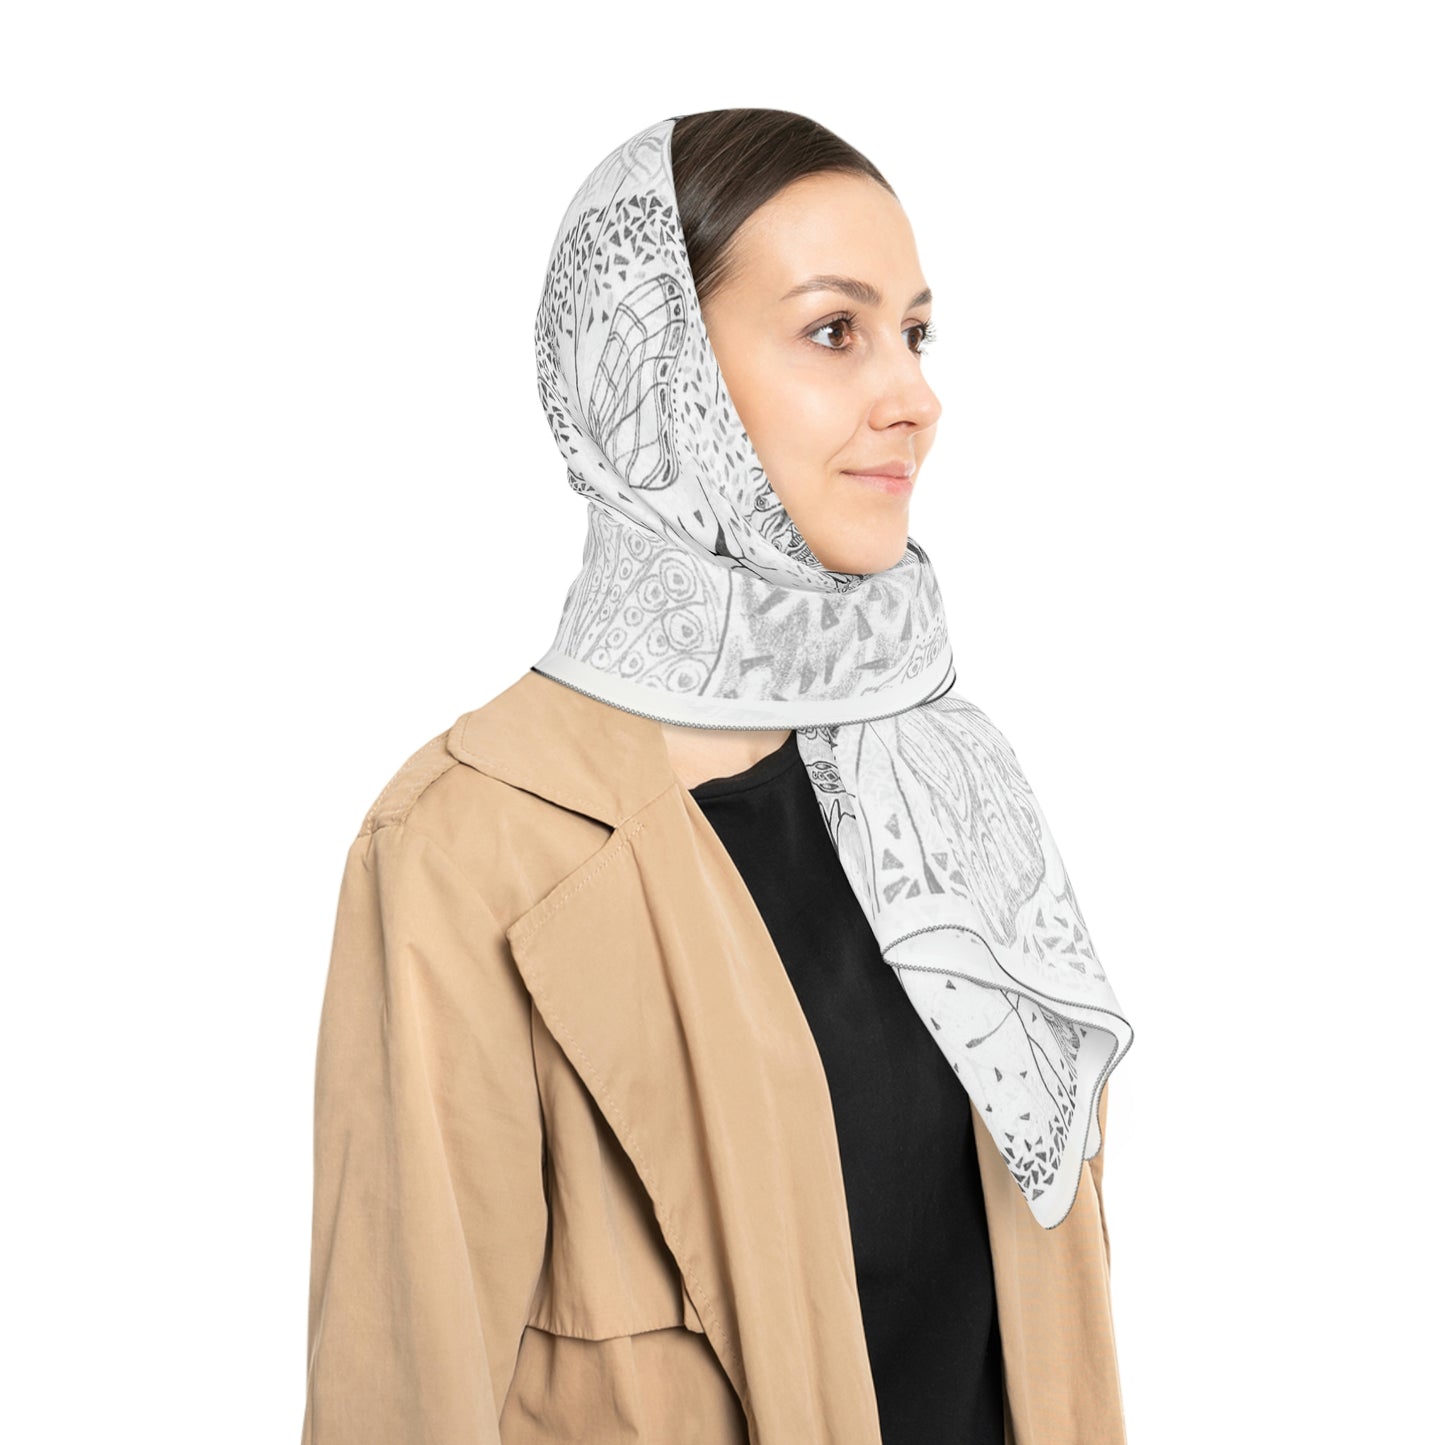 Chinese Years Zodiac Sign Poly Scarf (Snake) White